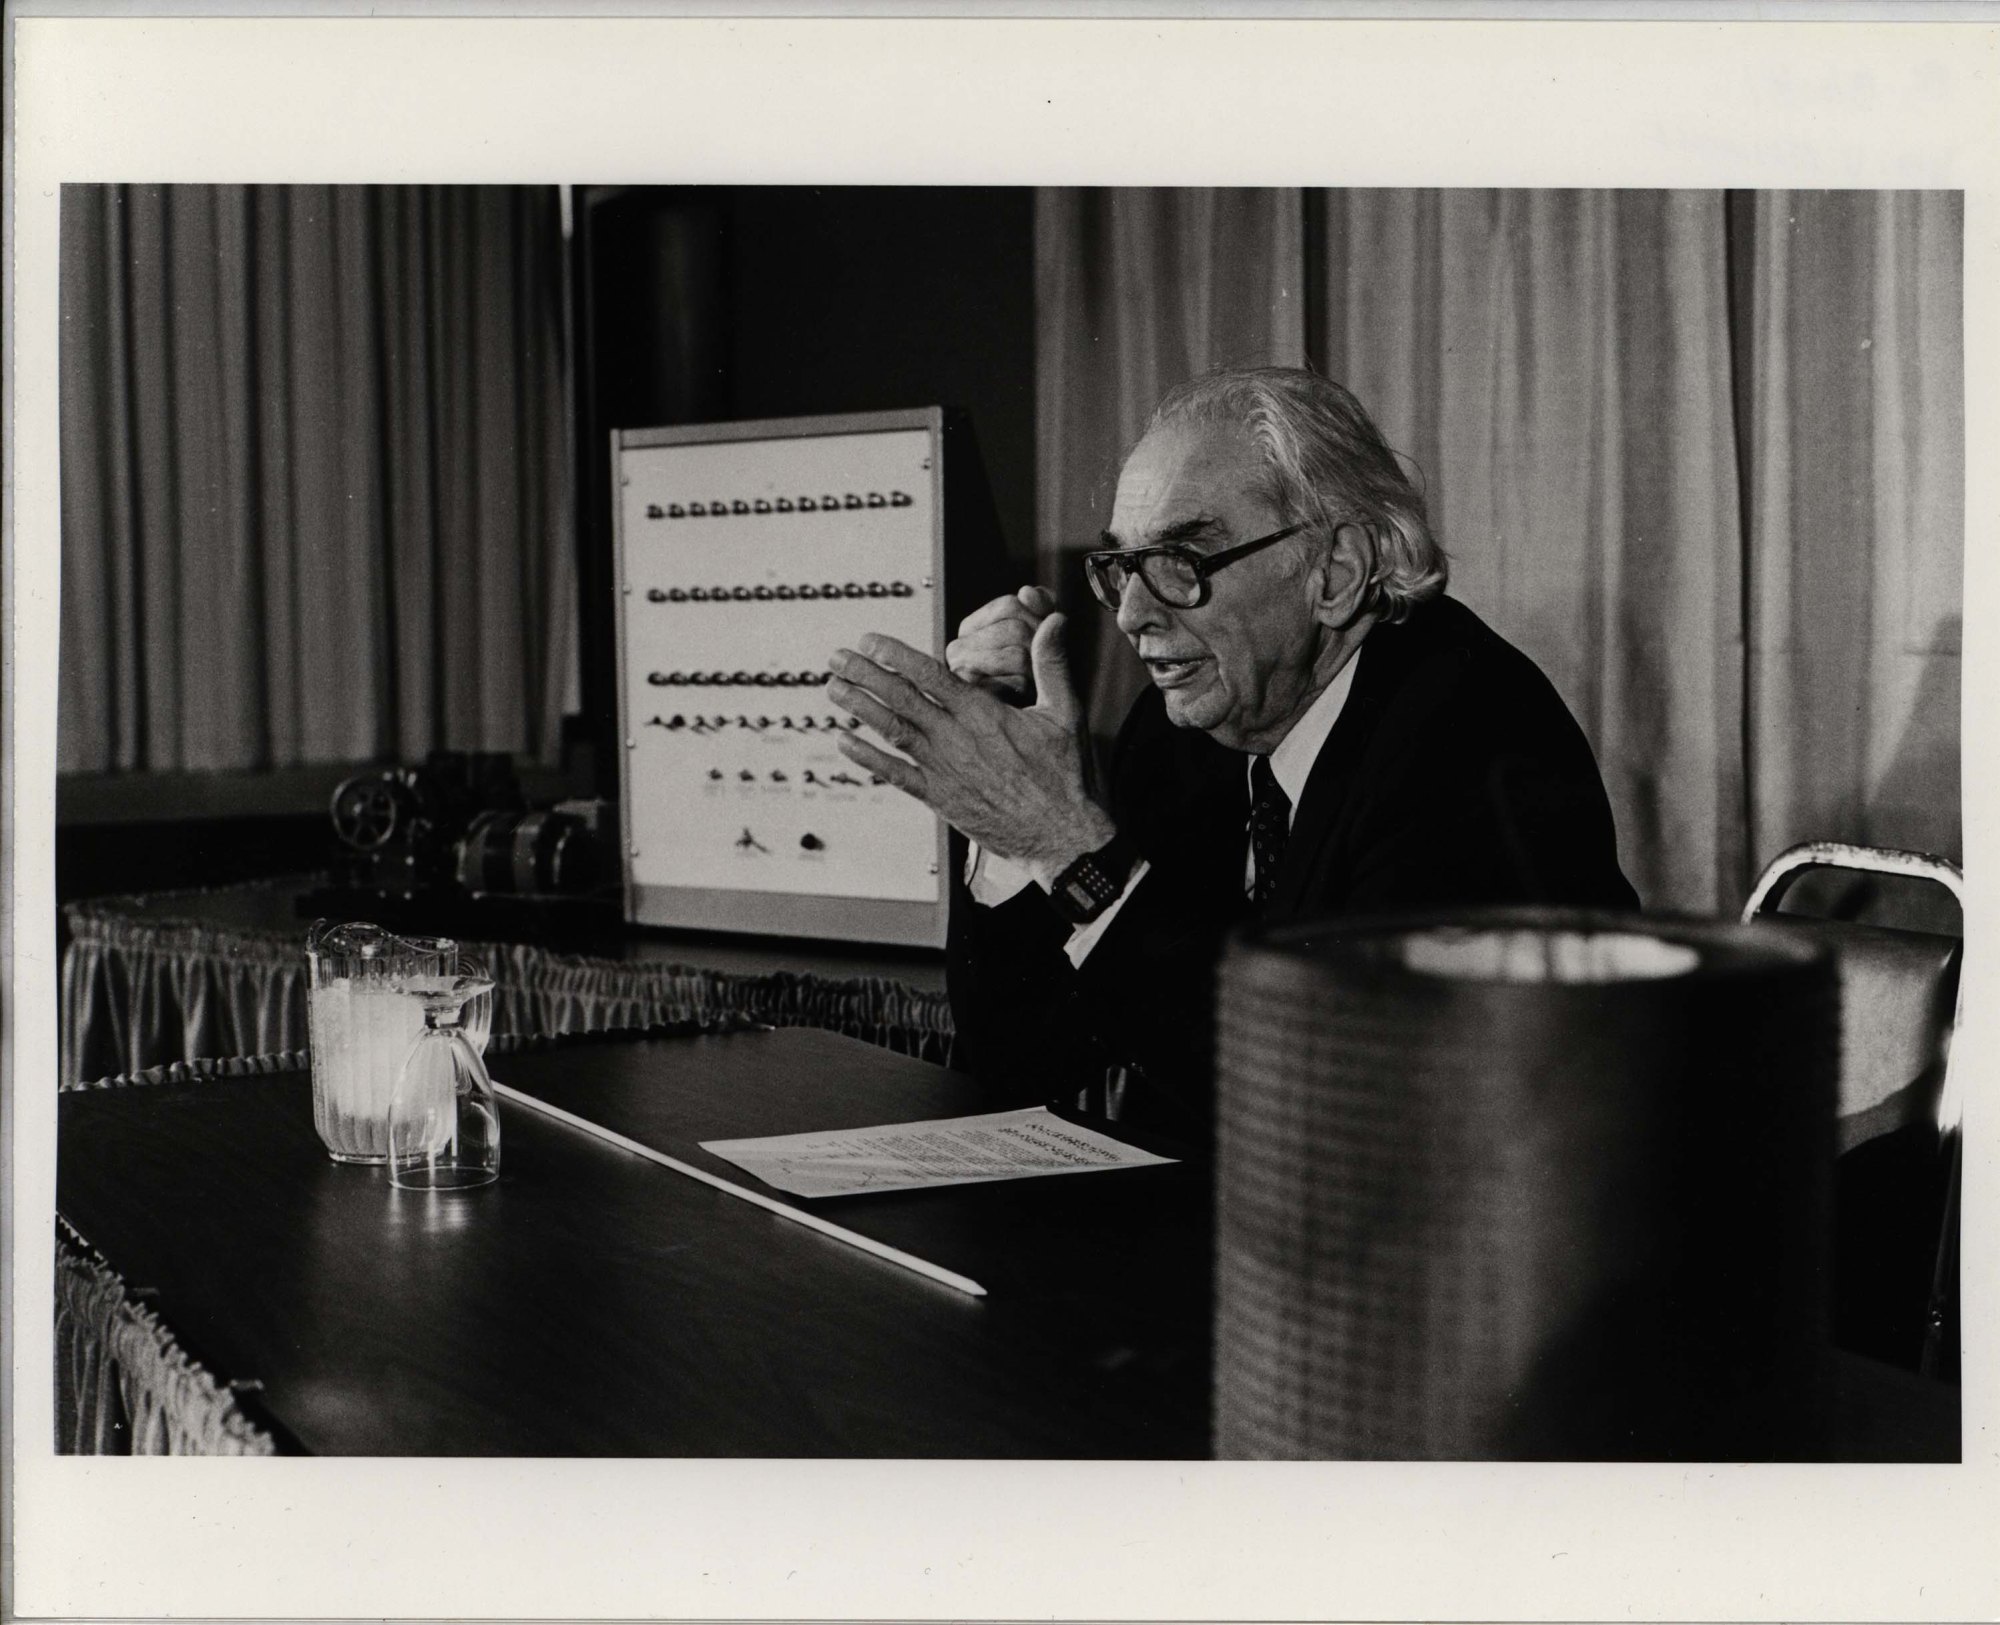 Black and white image of John Atanasoff giving a lecture